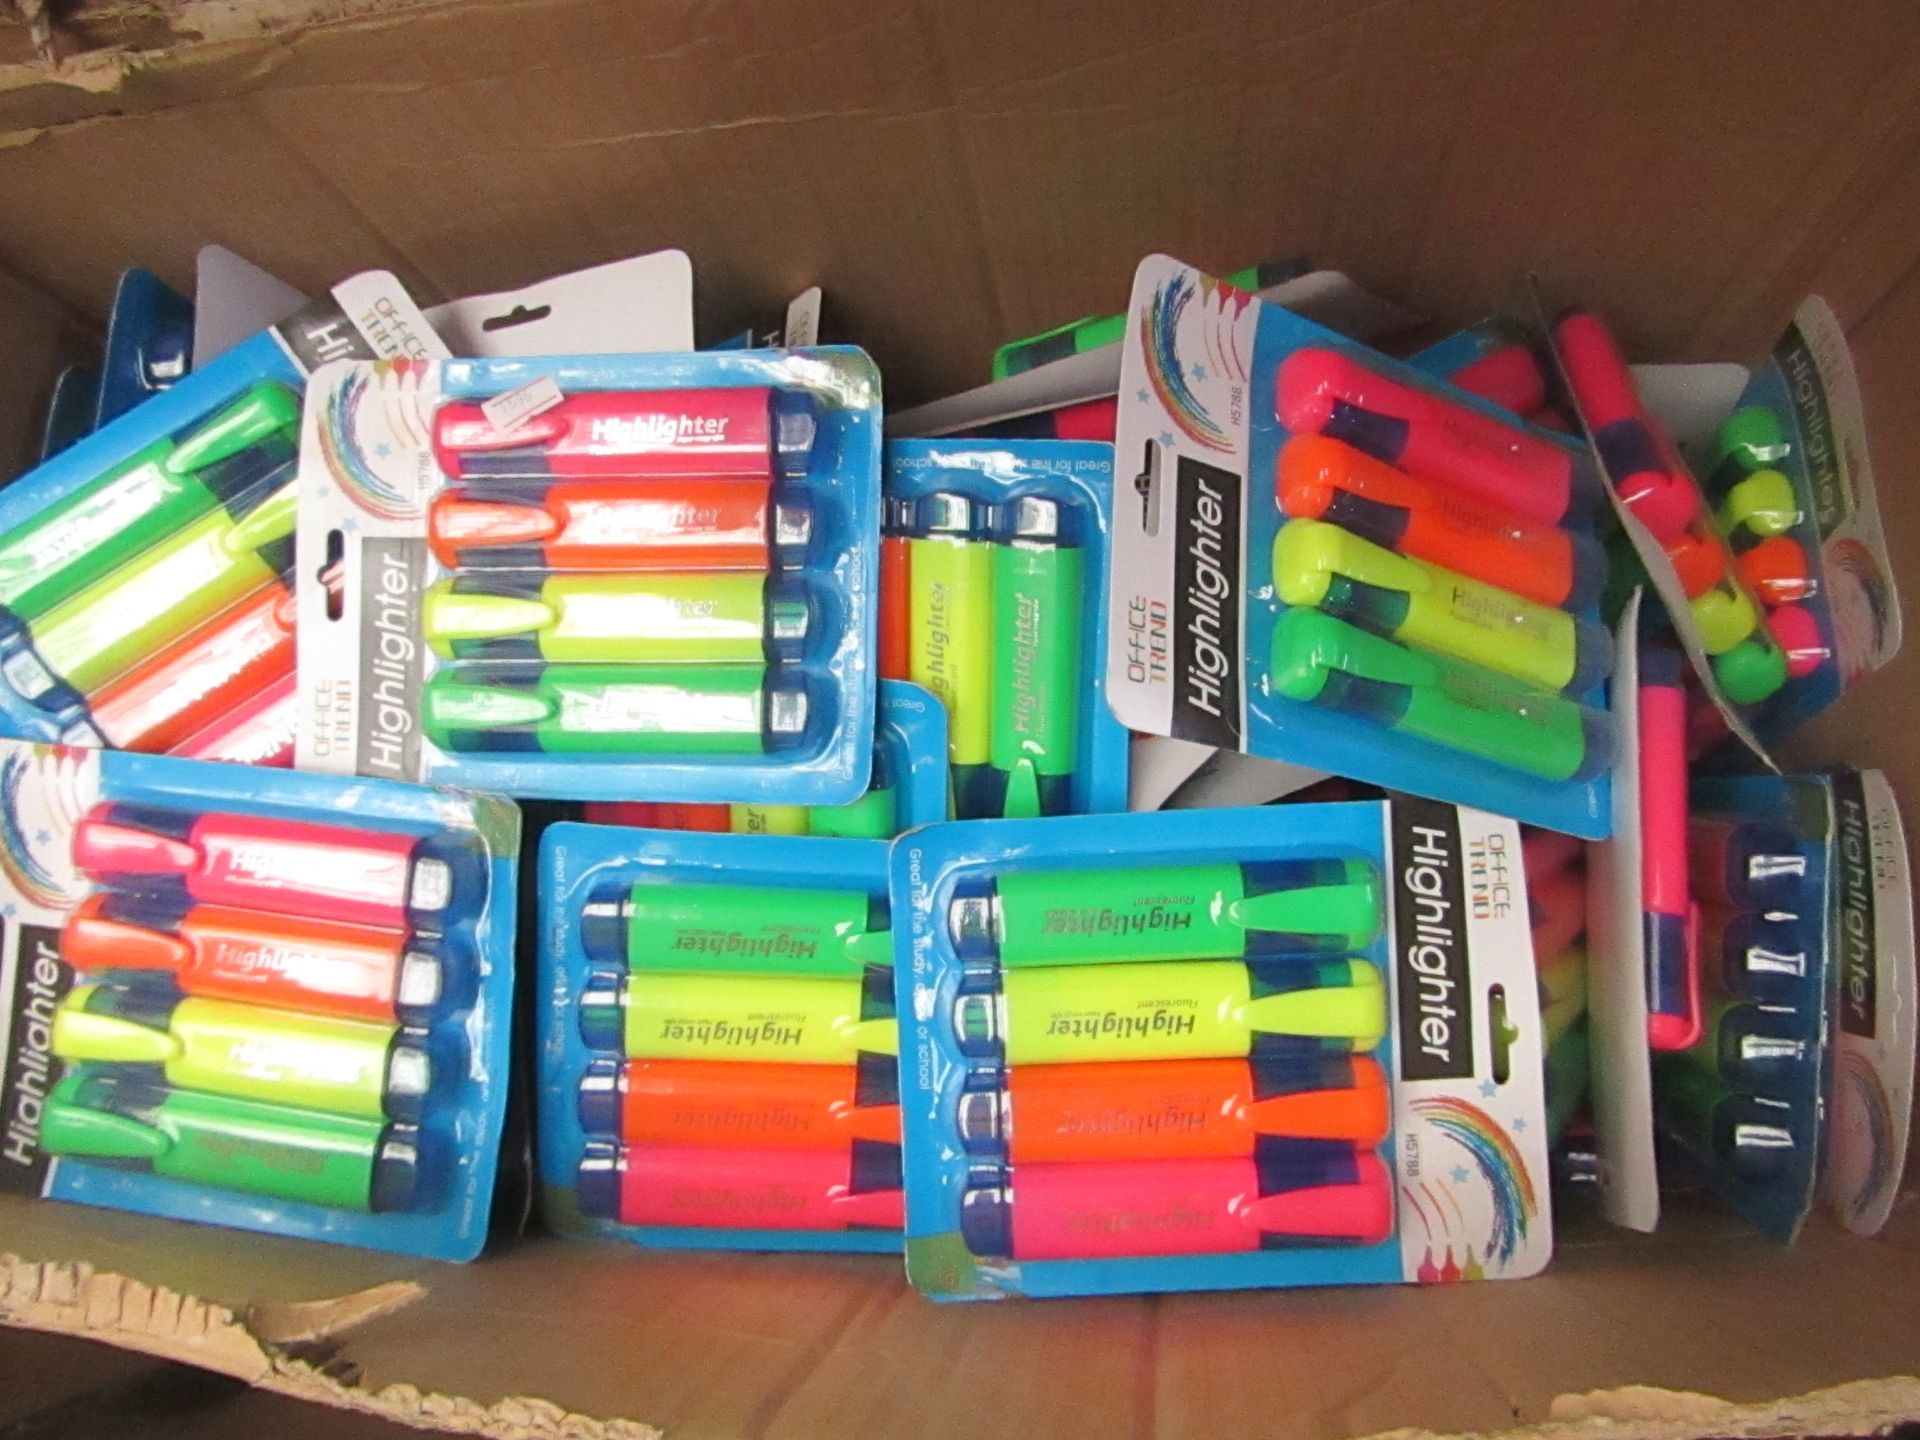 10 x packs of 4 office trend highlighters comes in colours green, yellow, orange and pink, seem